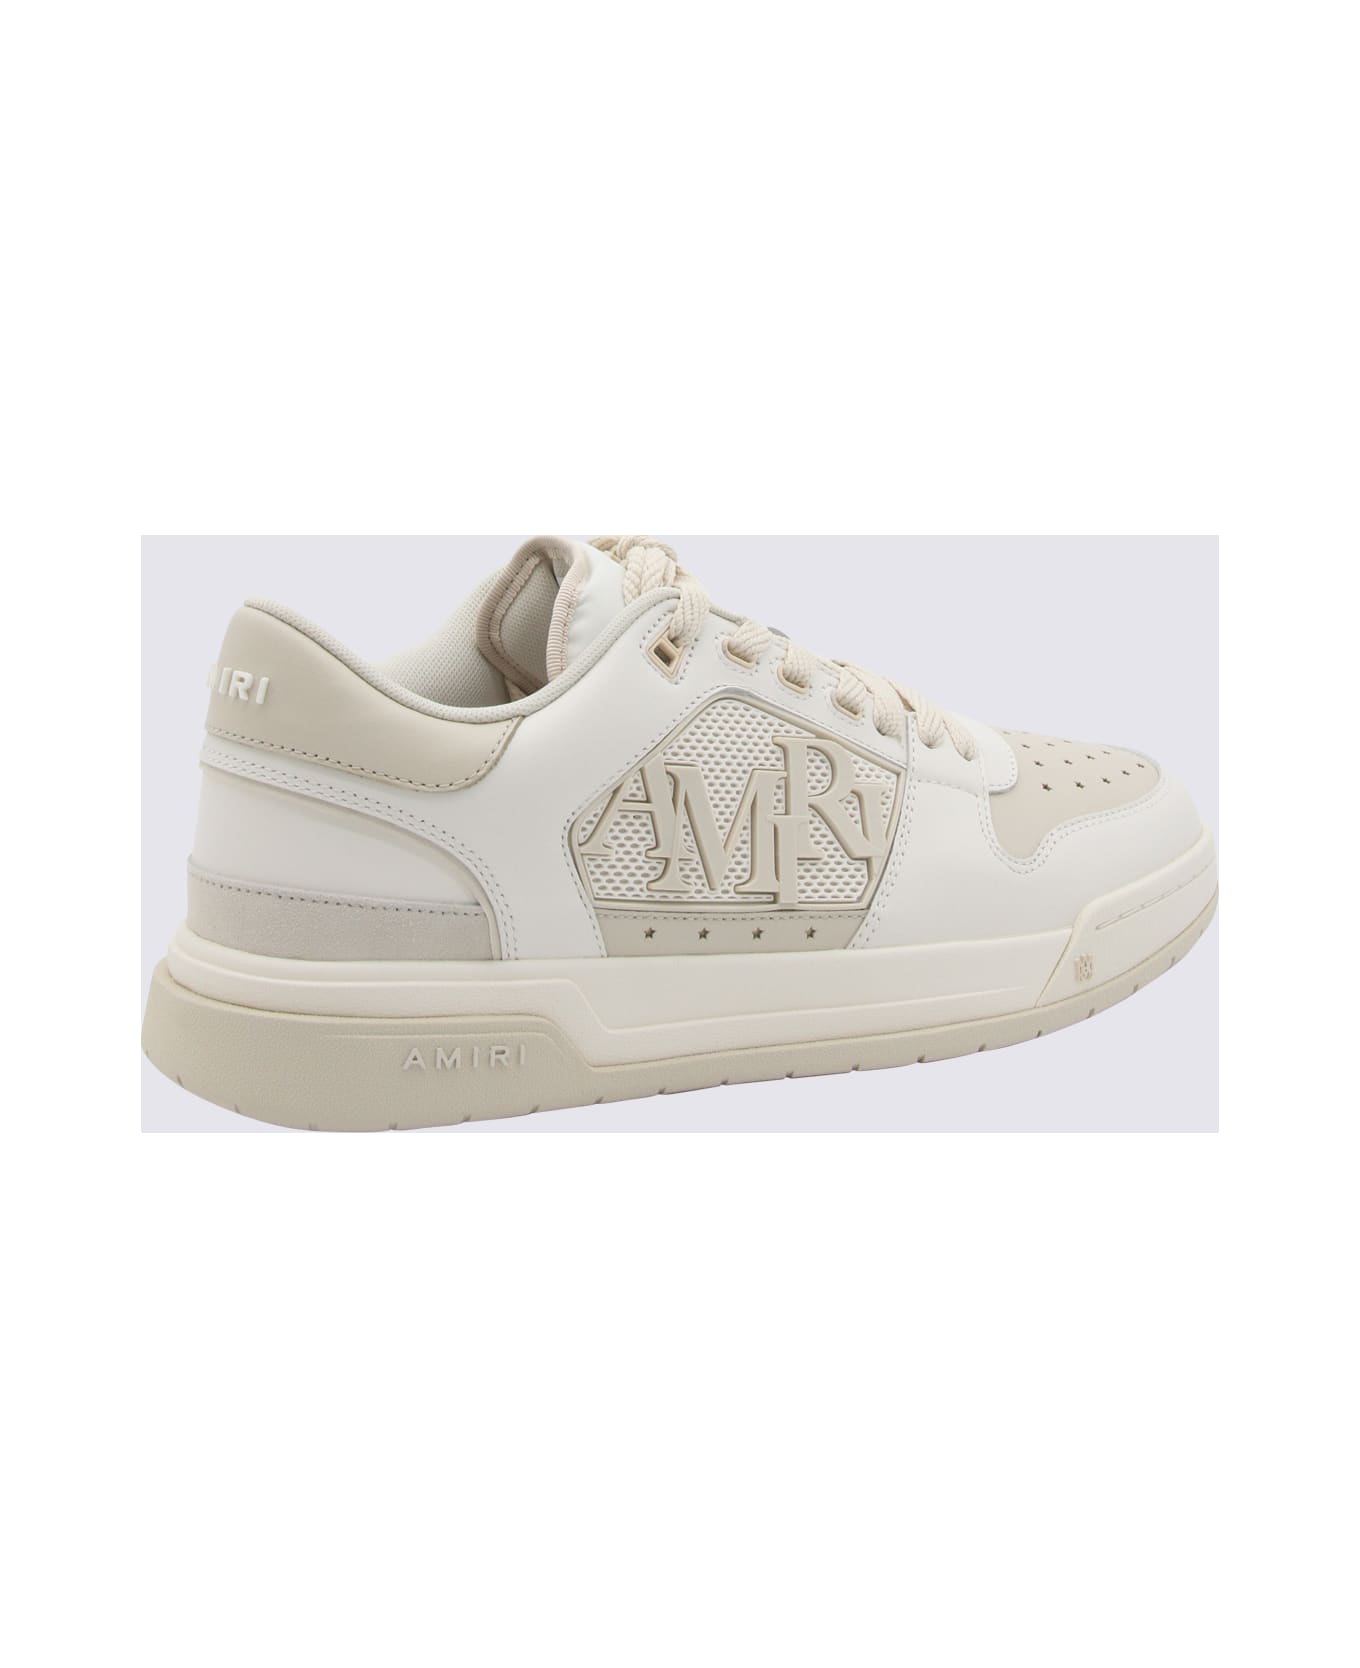 AMIRI White Leather Sneakers - ALABASTER スニーカー